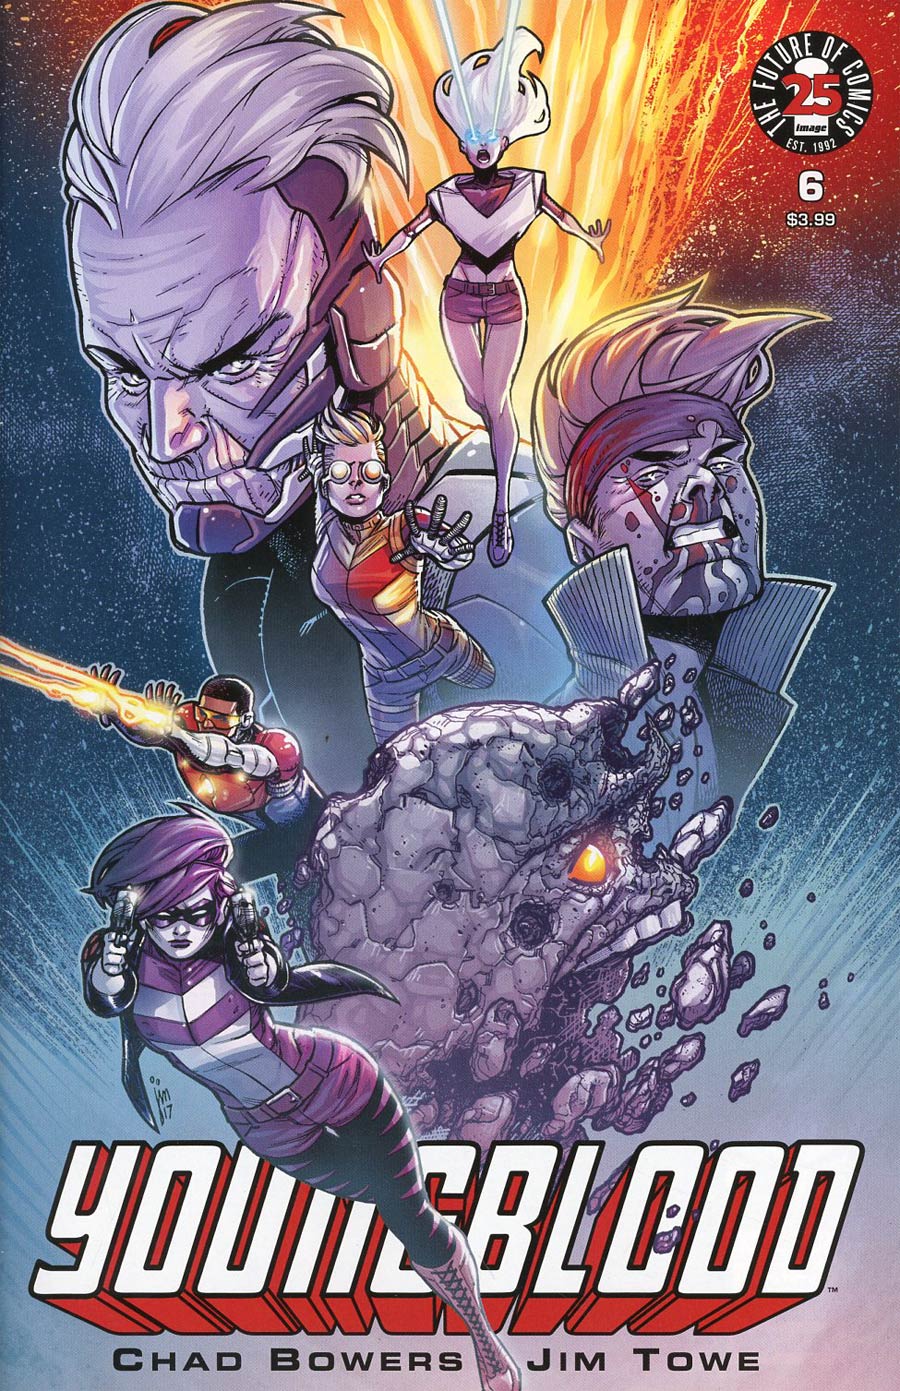 Youngblood Vol 5 #6 Cover A Regular Jim Towe Cover